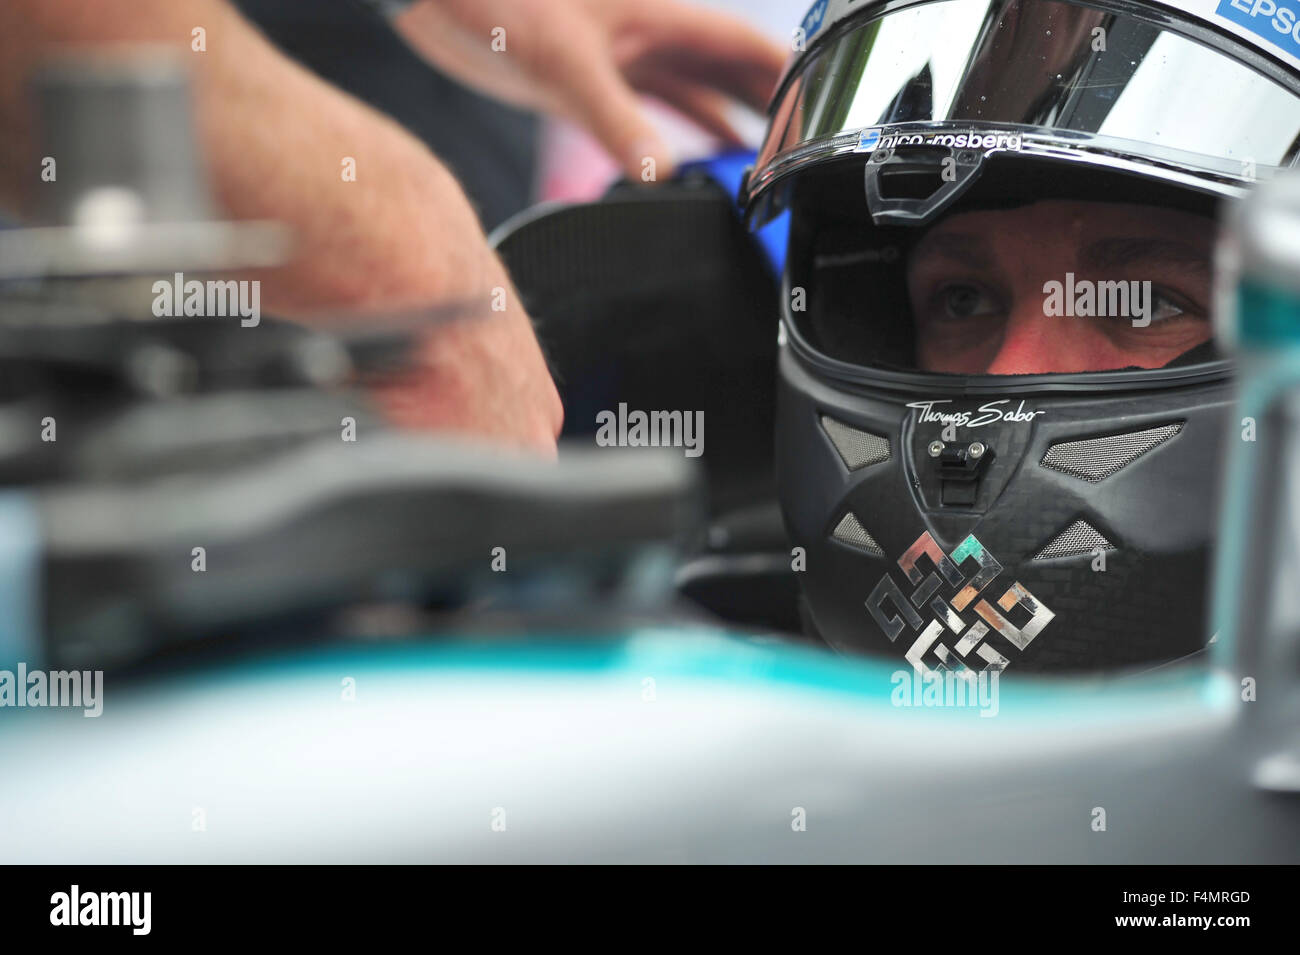 Nico Rosberg sitting in a Mercedes F1 car at the Goodwood Festival of Speed in the UK. Stock Photo